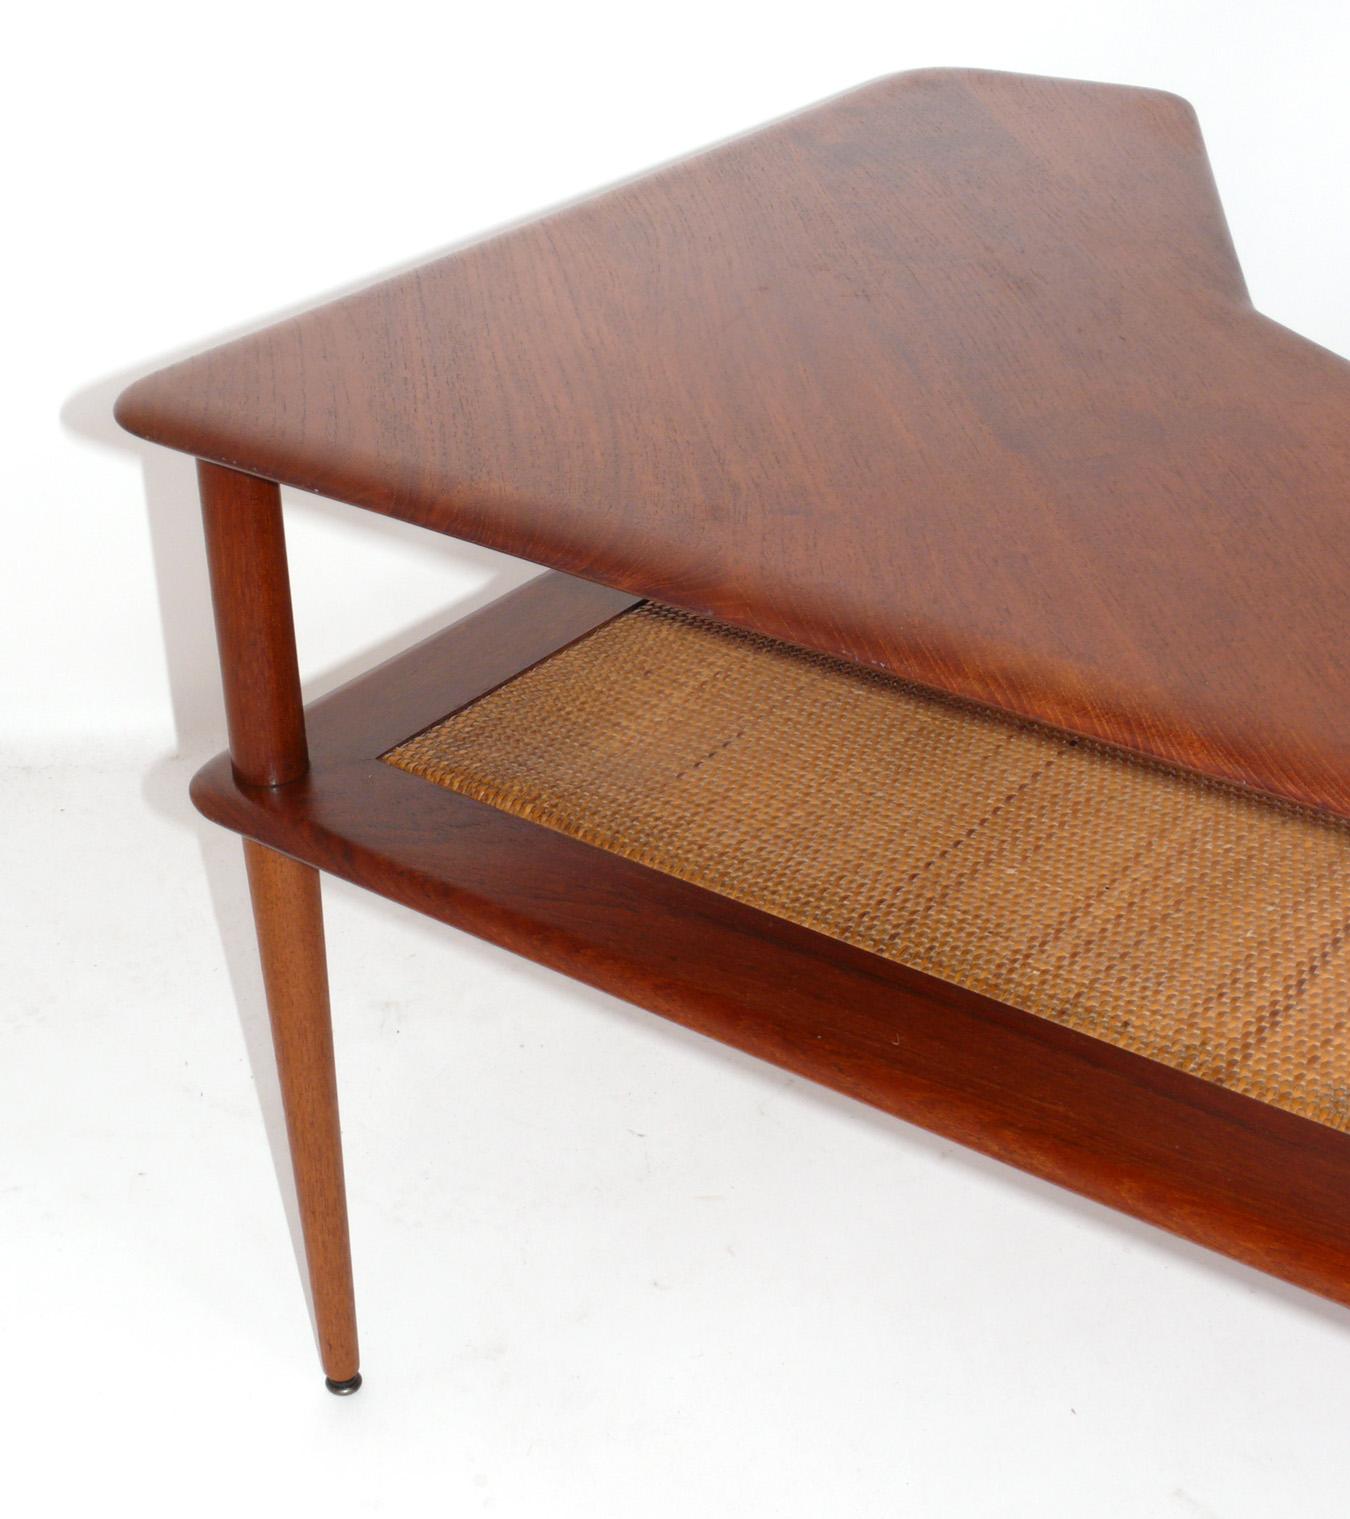 Danish Modern Peter Hvidt Teak and Cane End Table In Good Condition For Sale In Atlanta, GA